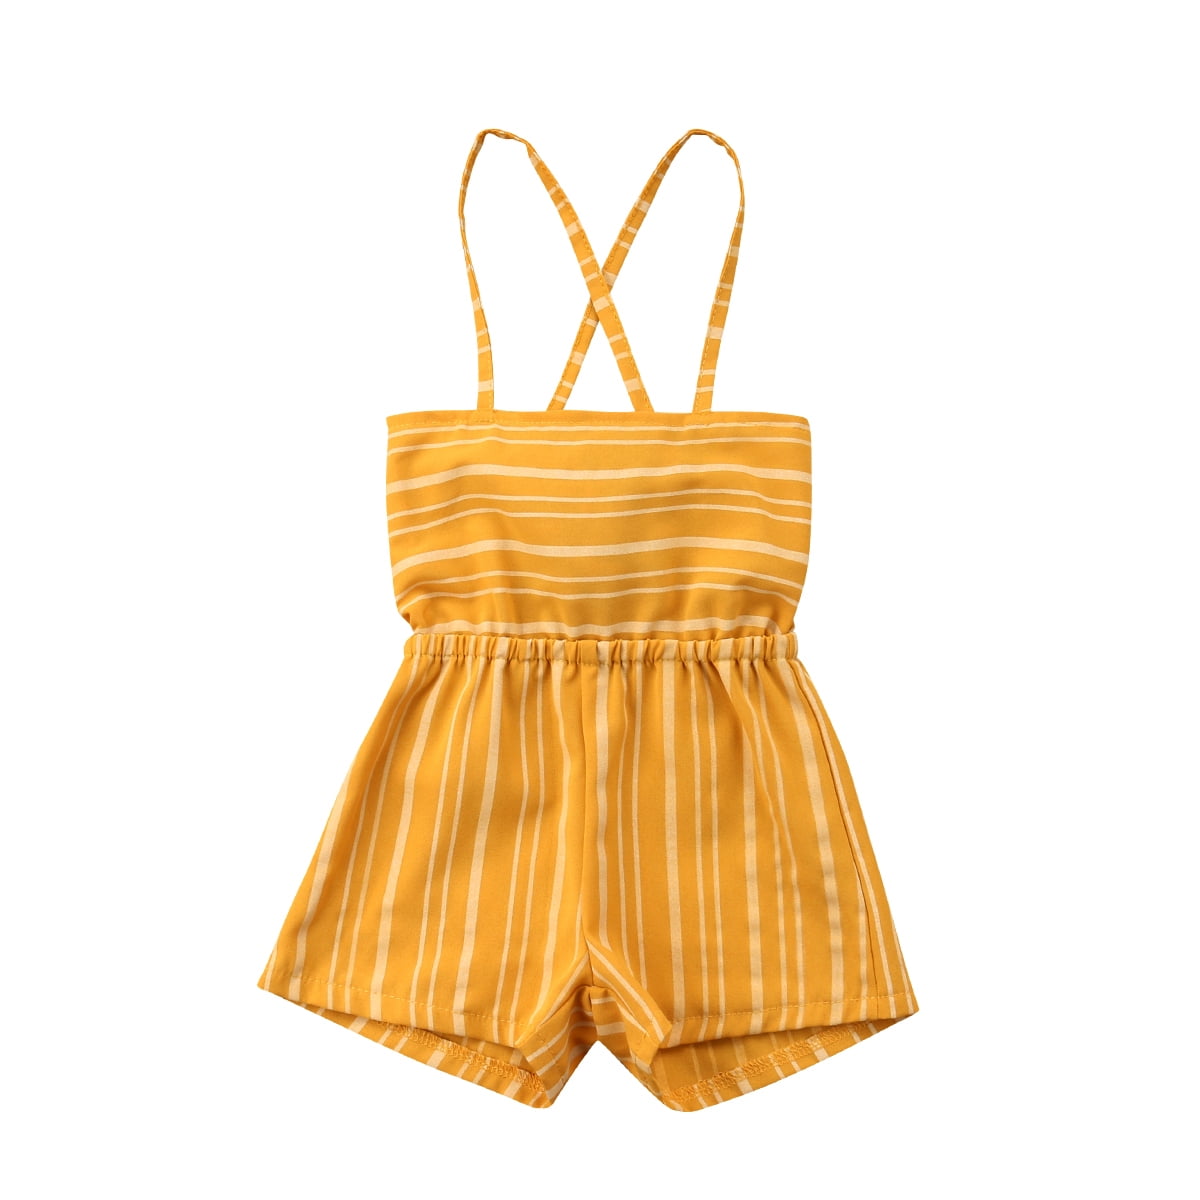 Toddler Infant Baby Girl Striped Backless Halter Romper Jumpsuit Outfit Playsuit 